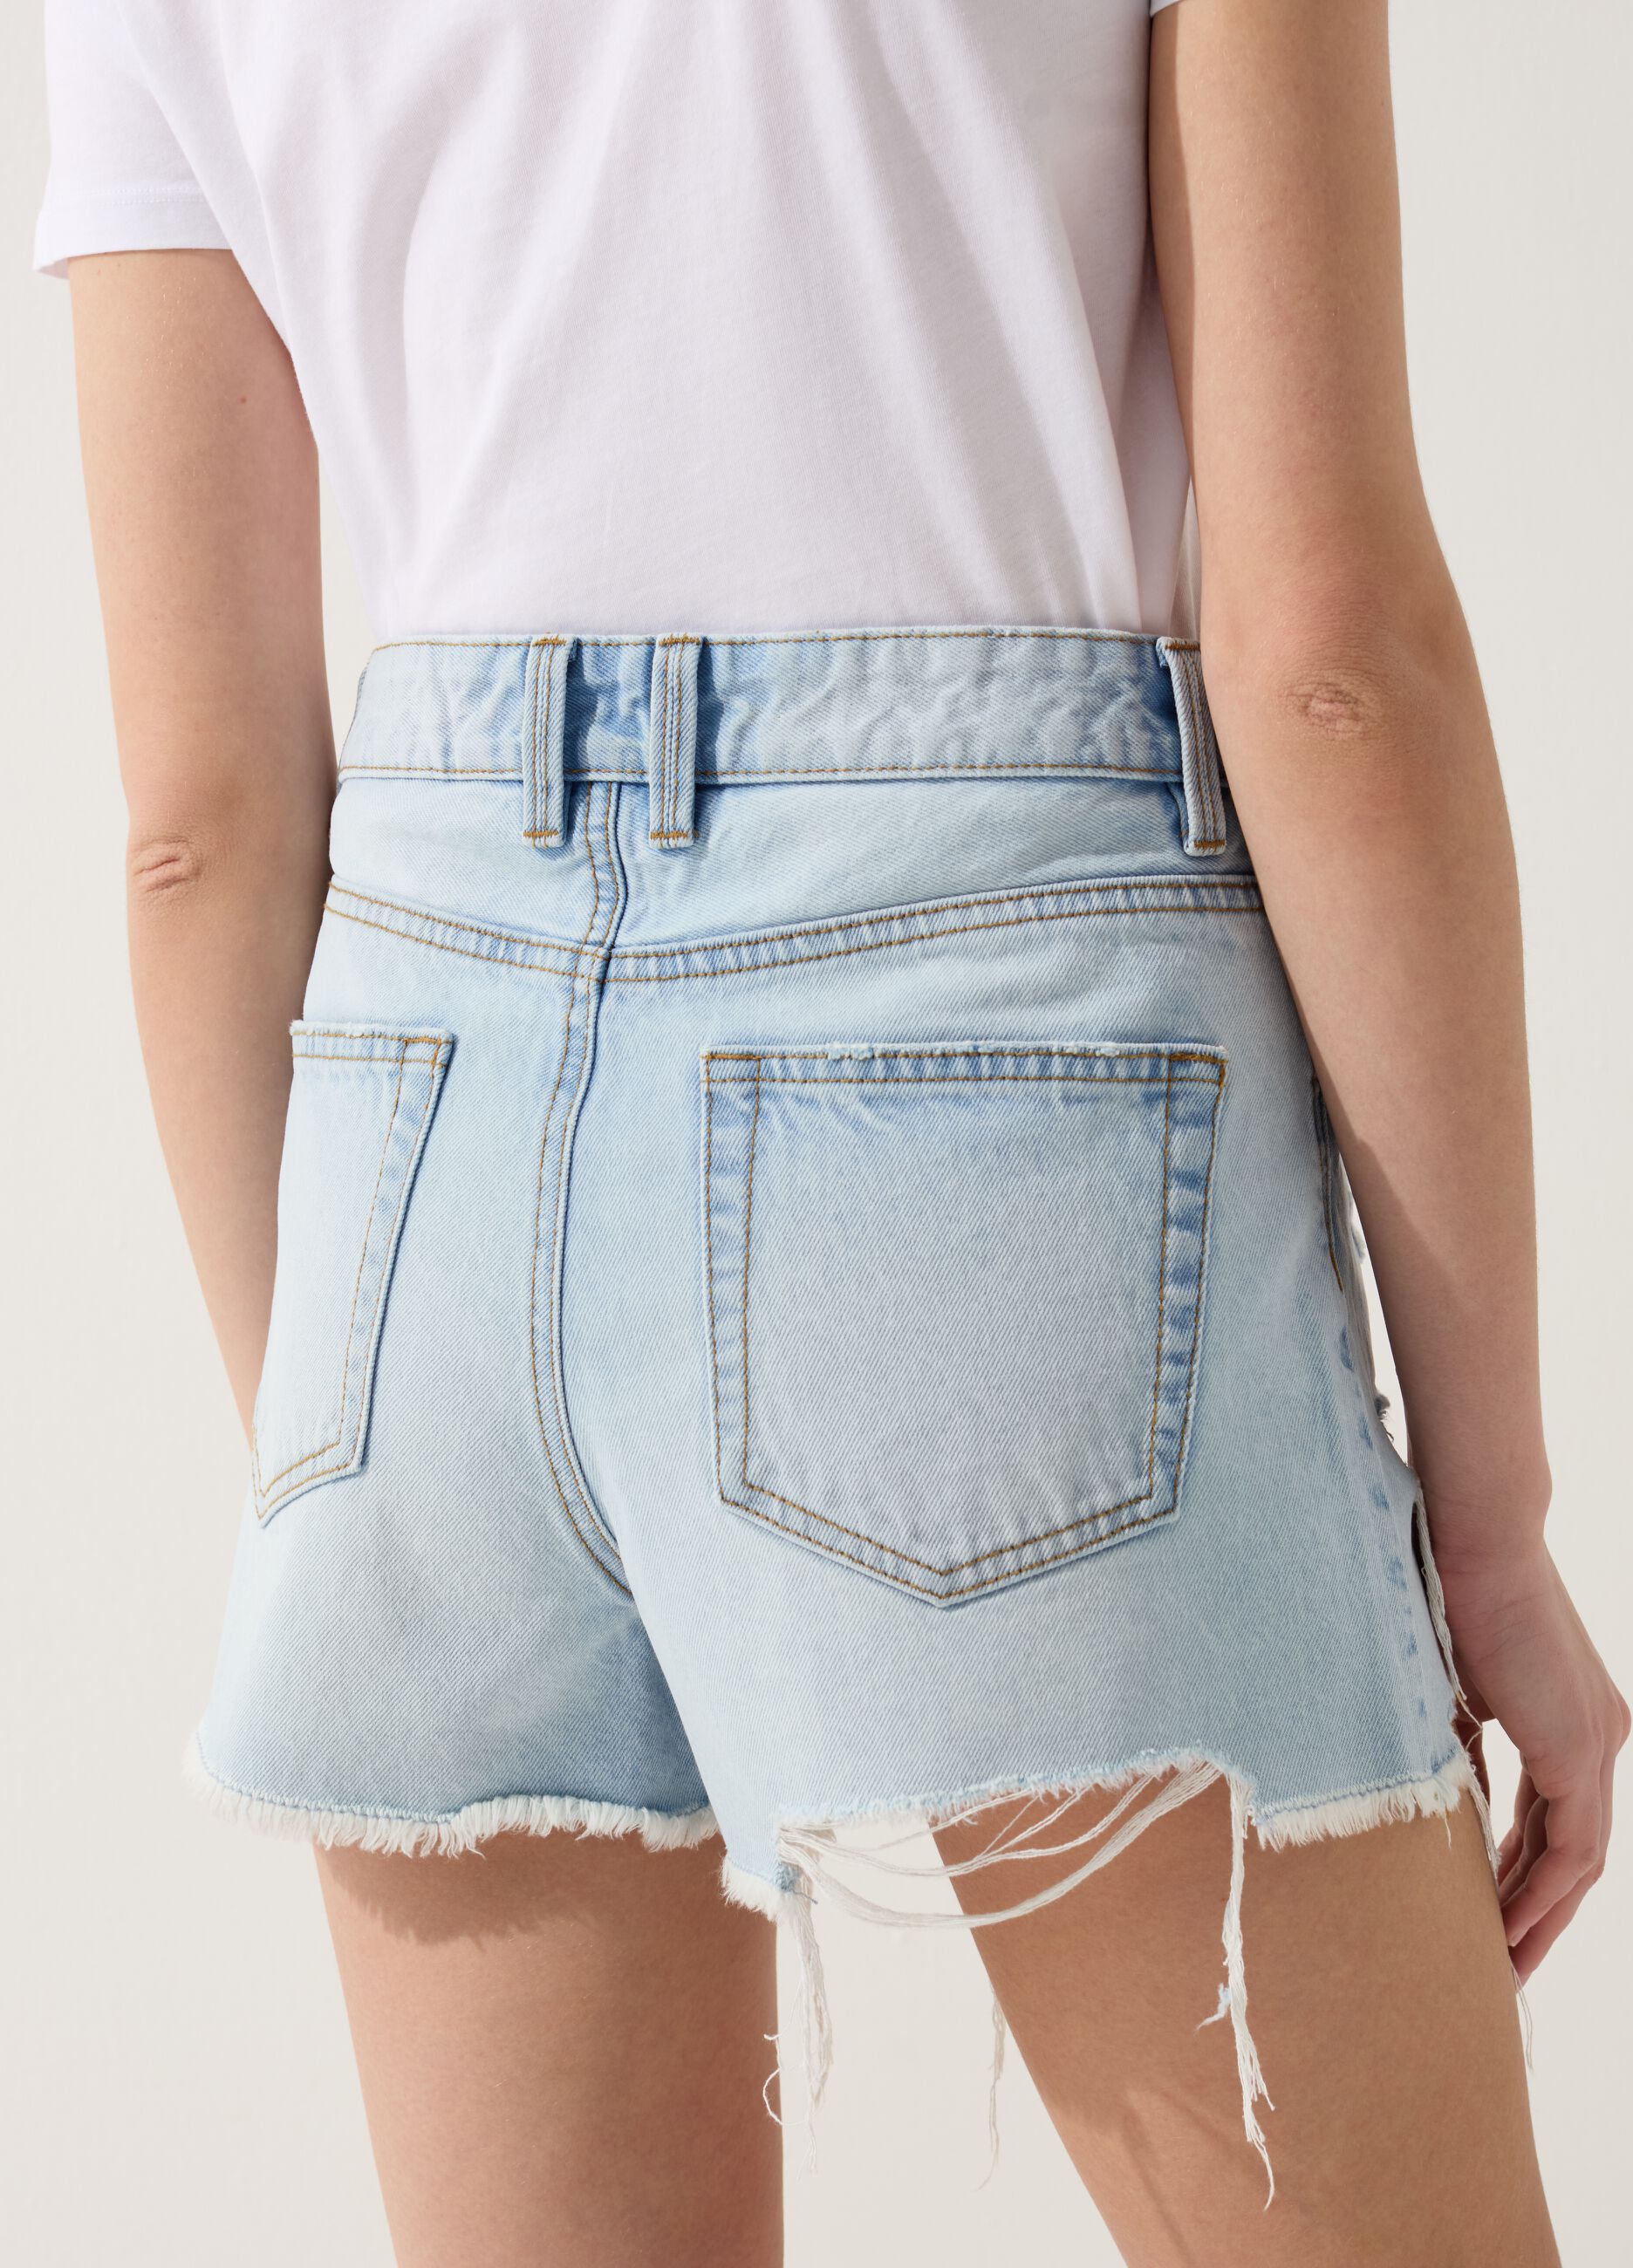 Denim shorts with rips and high waist